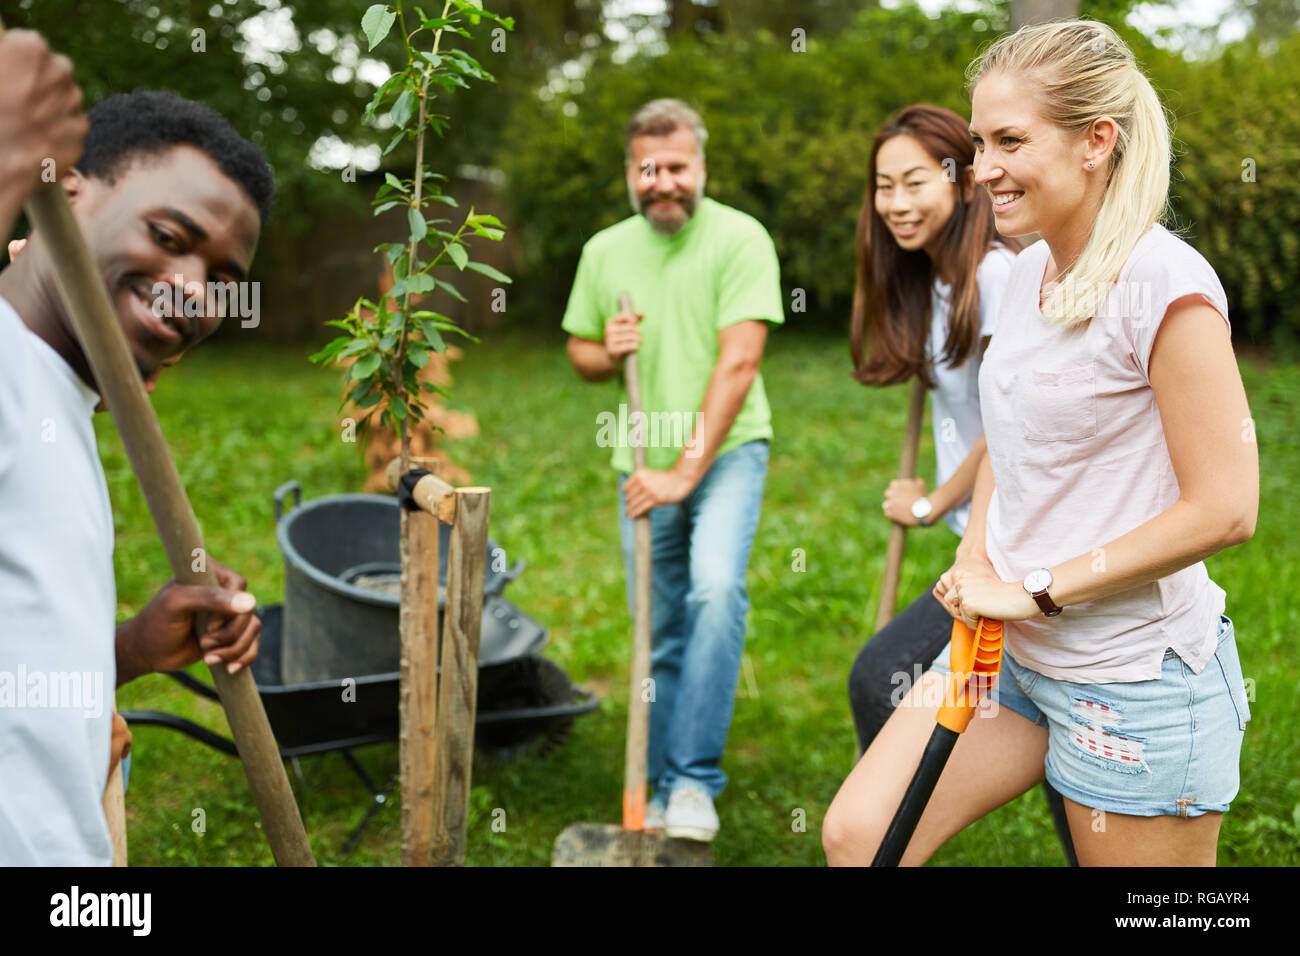 Team volunteer plants a tree together in the park during a climate protection campaign Stock Photo